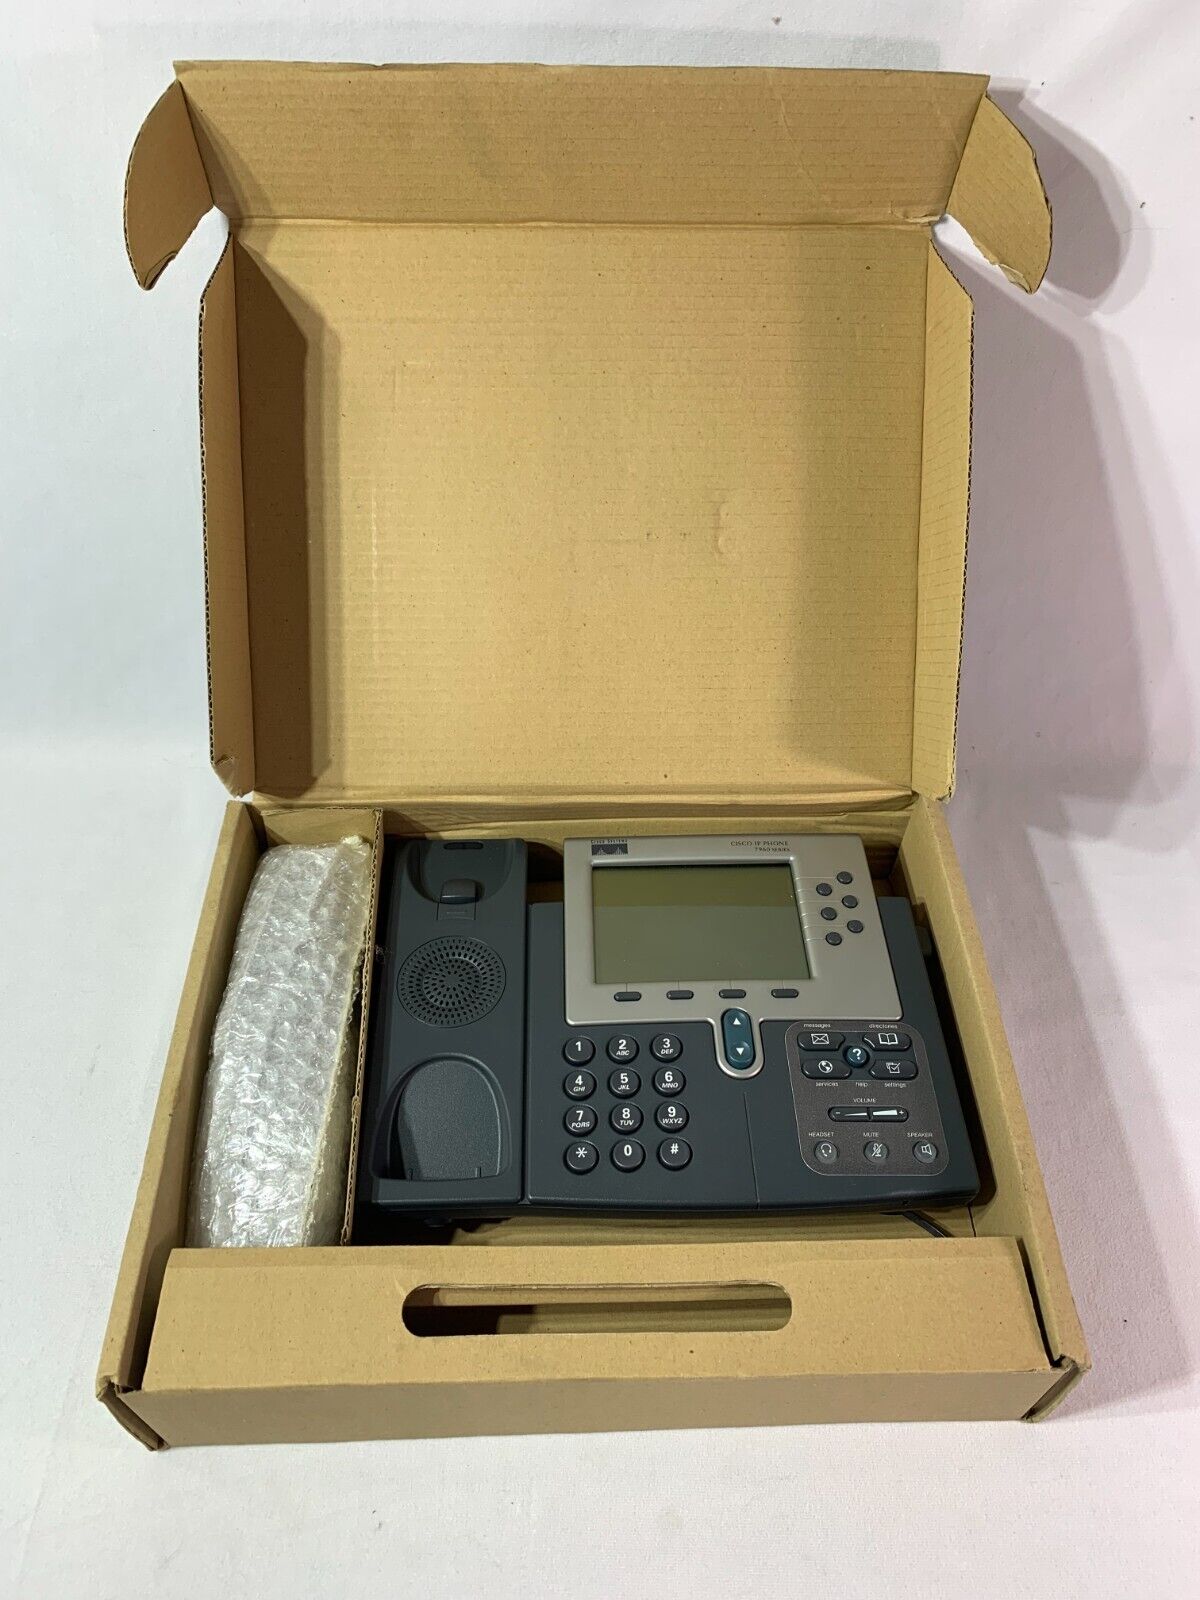 New Cisco 7960G IP Business Office Phone Telephone Set CP-7960G 7900 Series